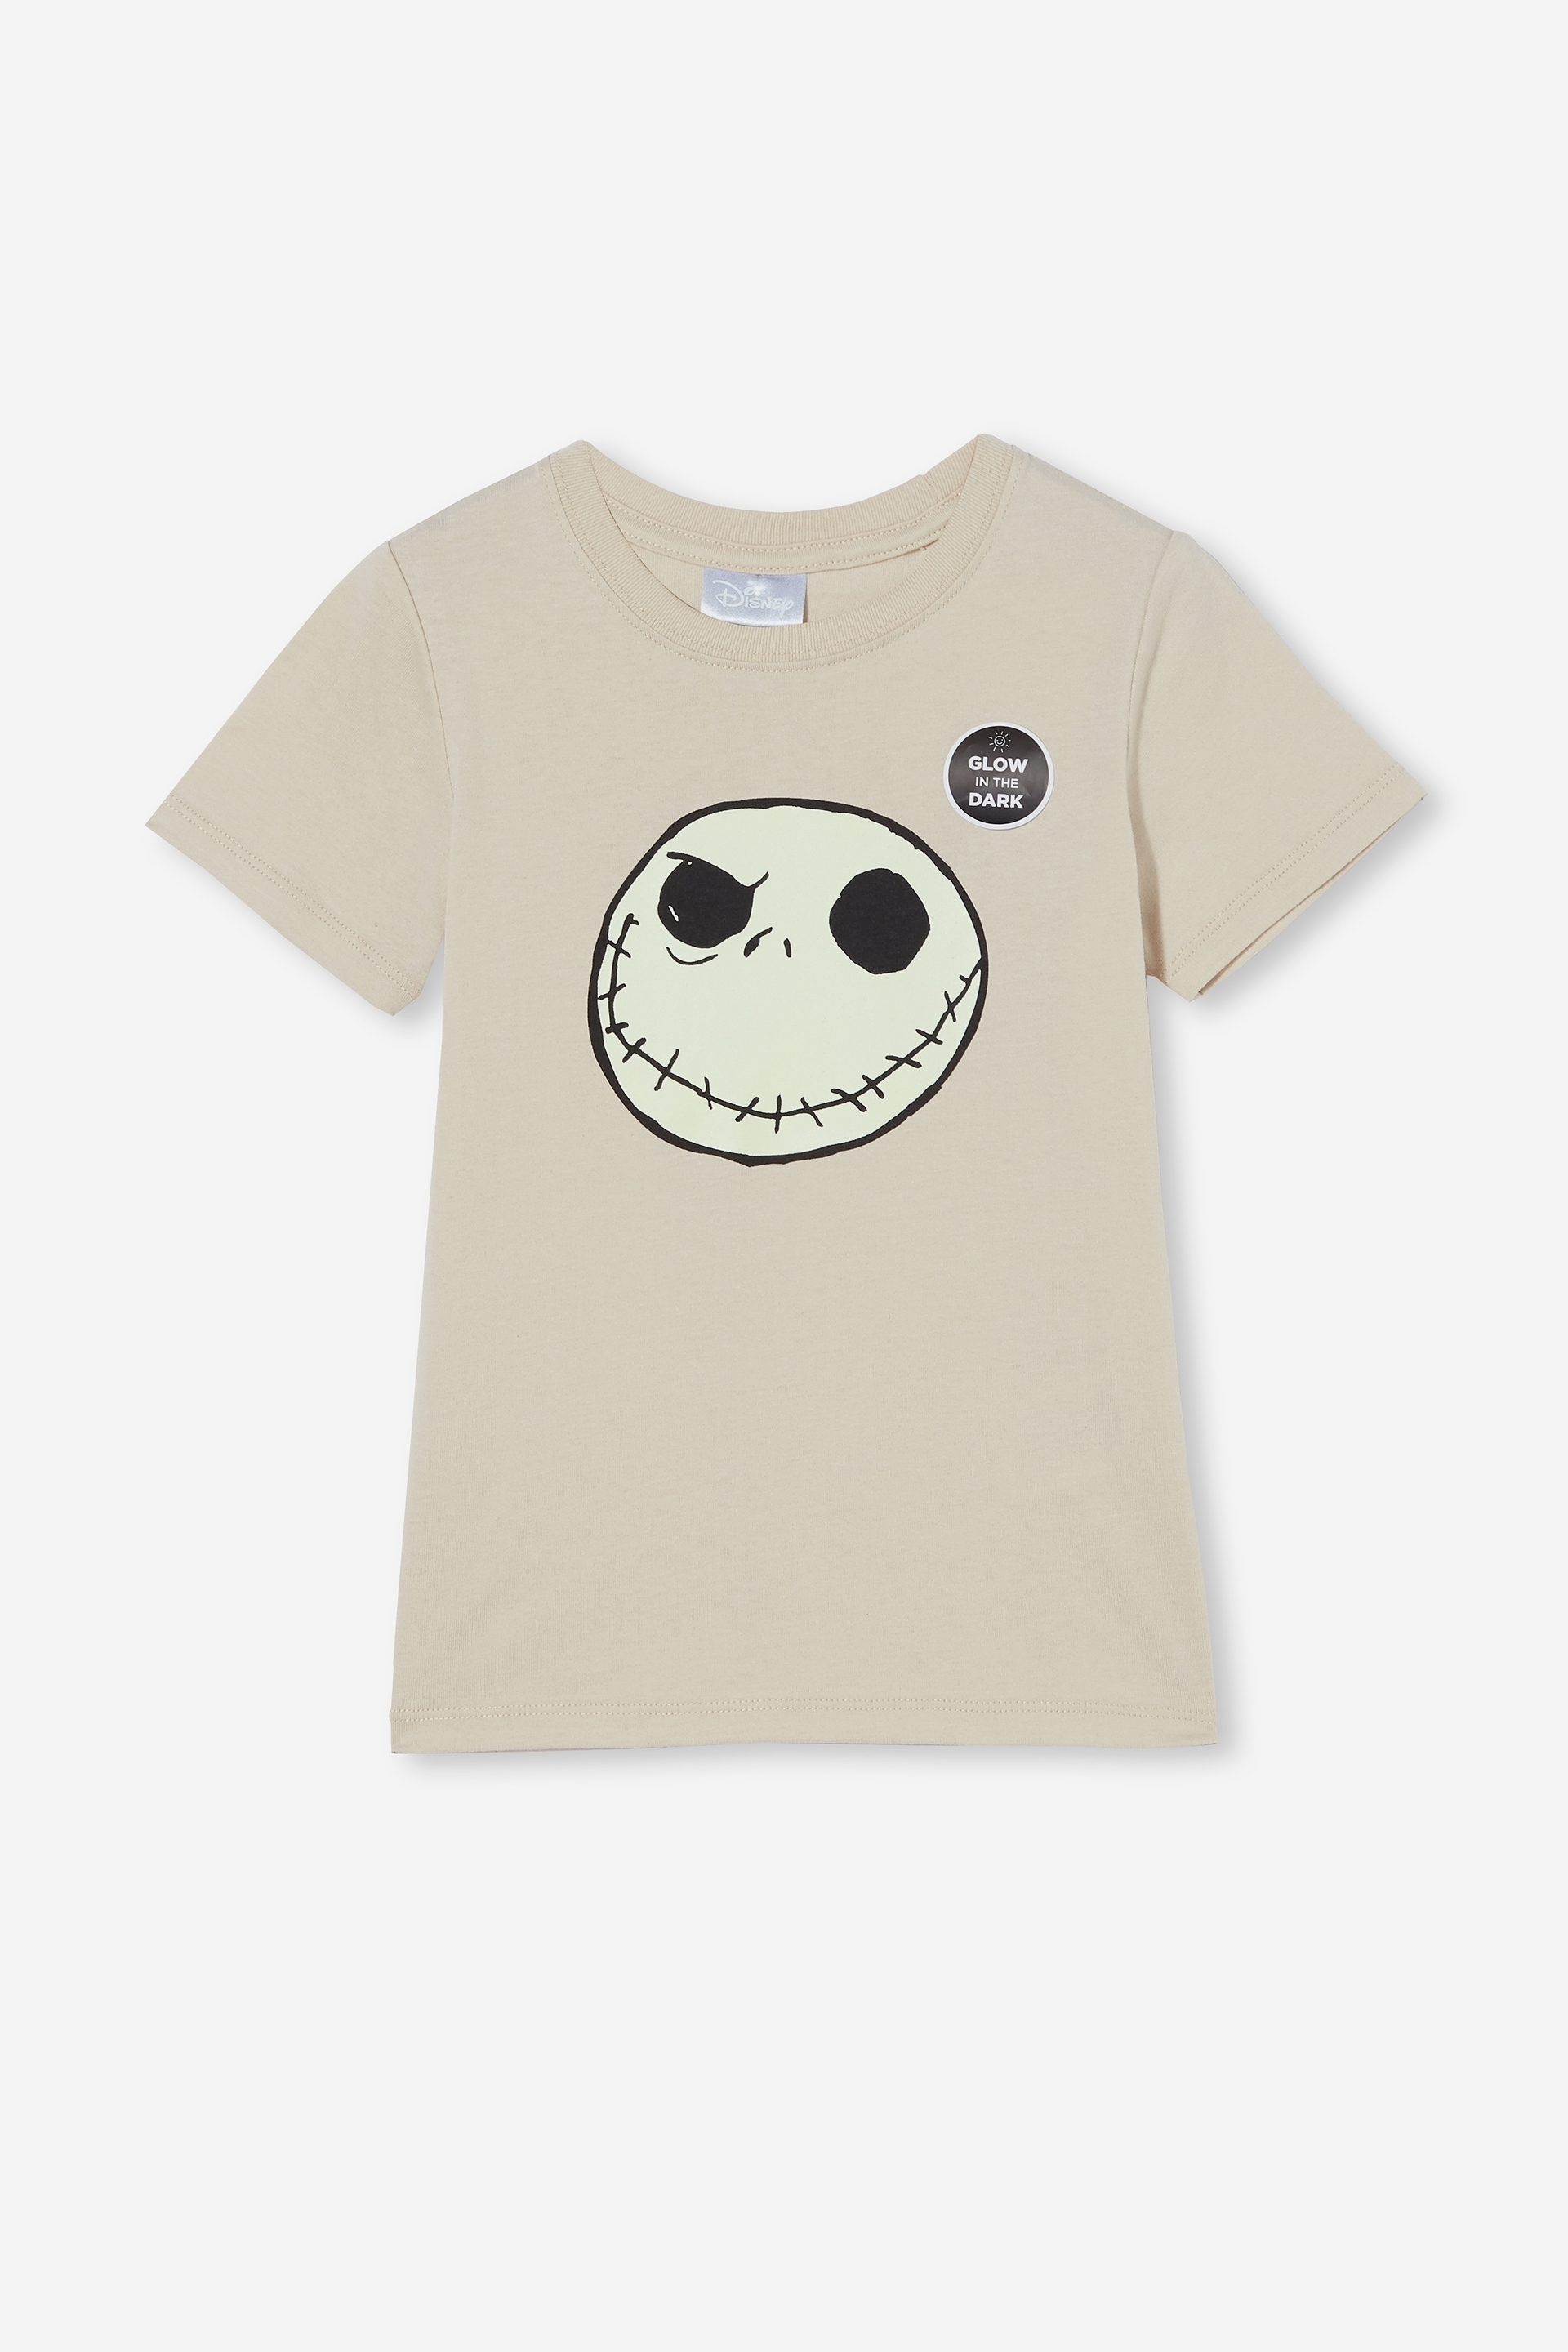 Cotton On Kids - Short Sleeve License Embellished Tee - Lcn dis rainy day /nightmare before christmas